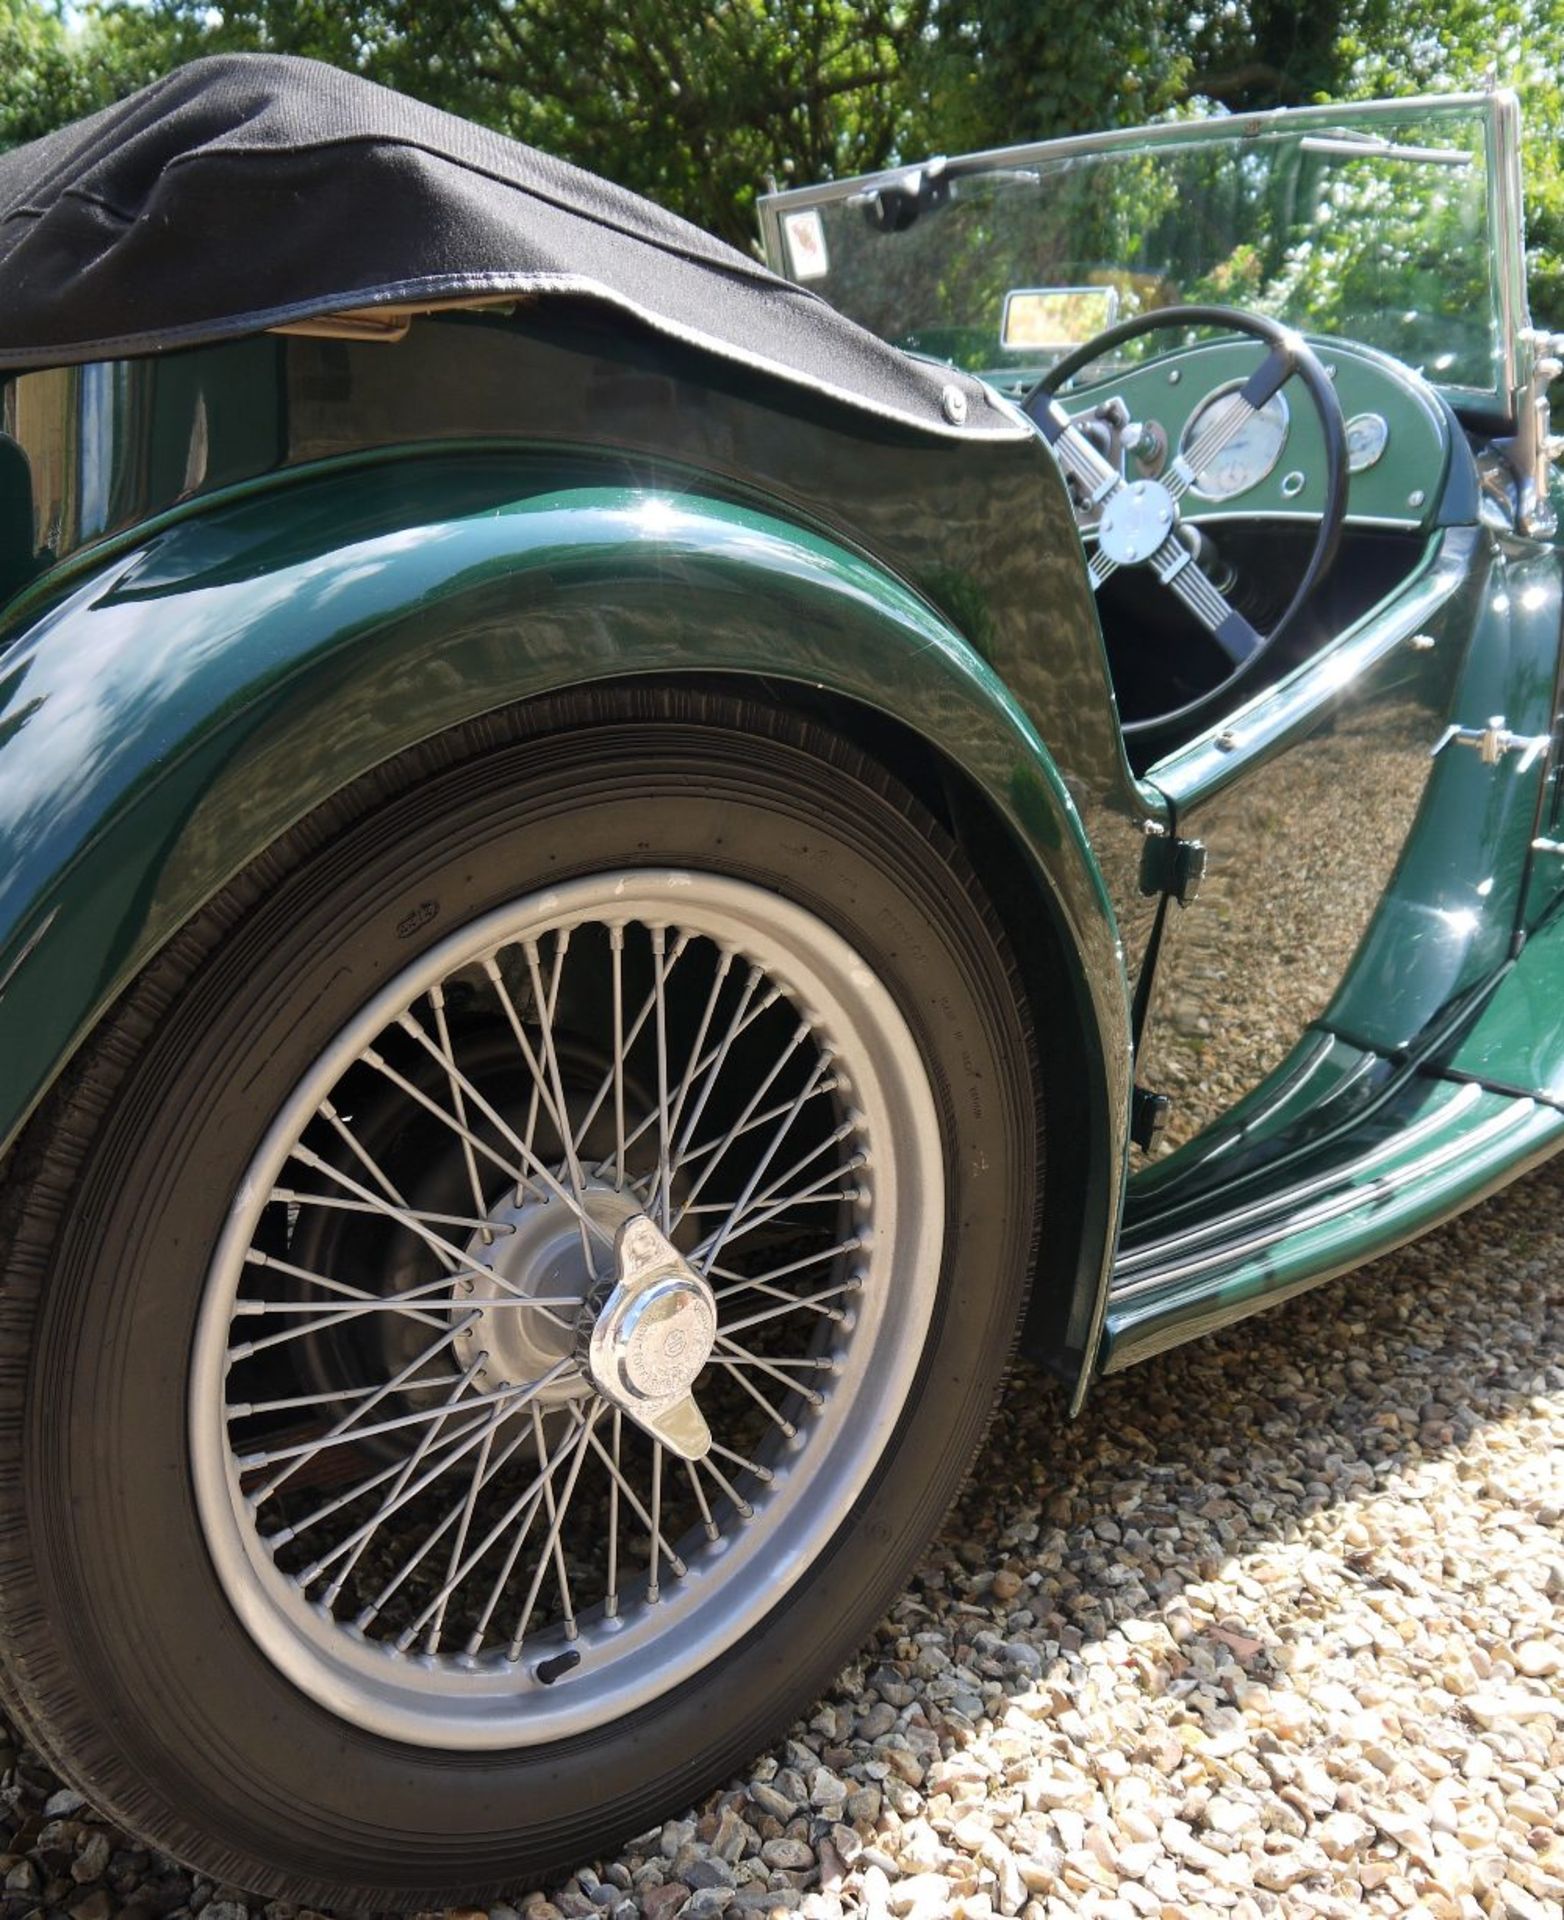 1949 MG TC 'MIDGET' Registration Number: XVV 276 Chassis number: TC 7712 Recorded Mileage: 40,700 - Image 7 of 21